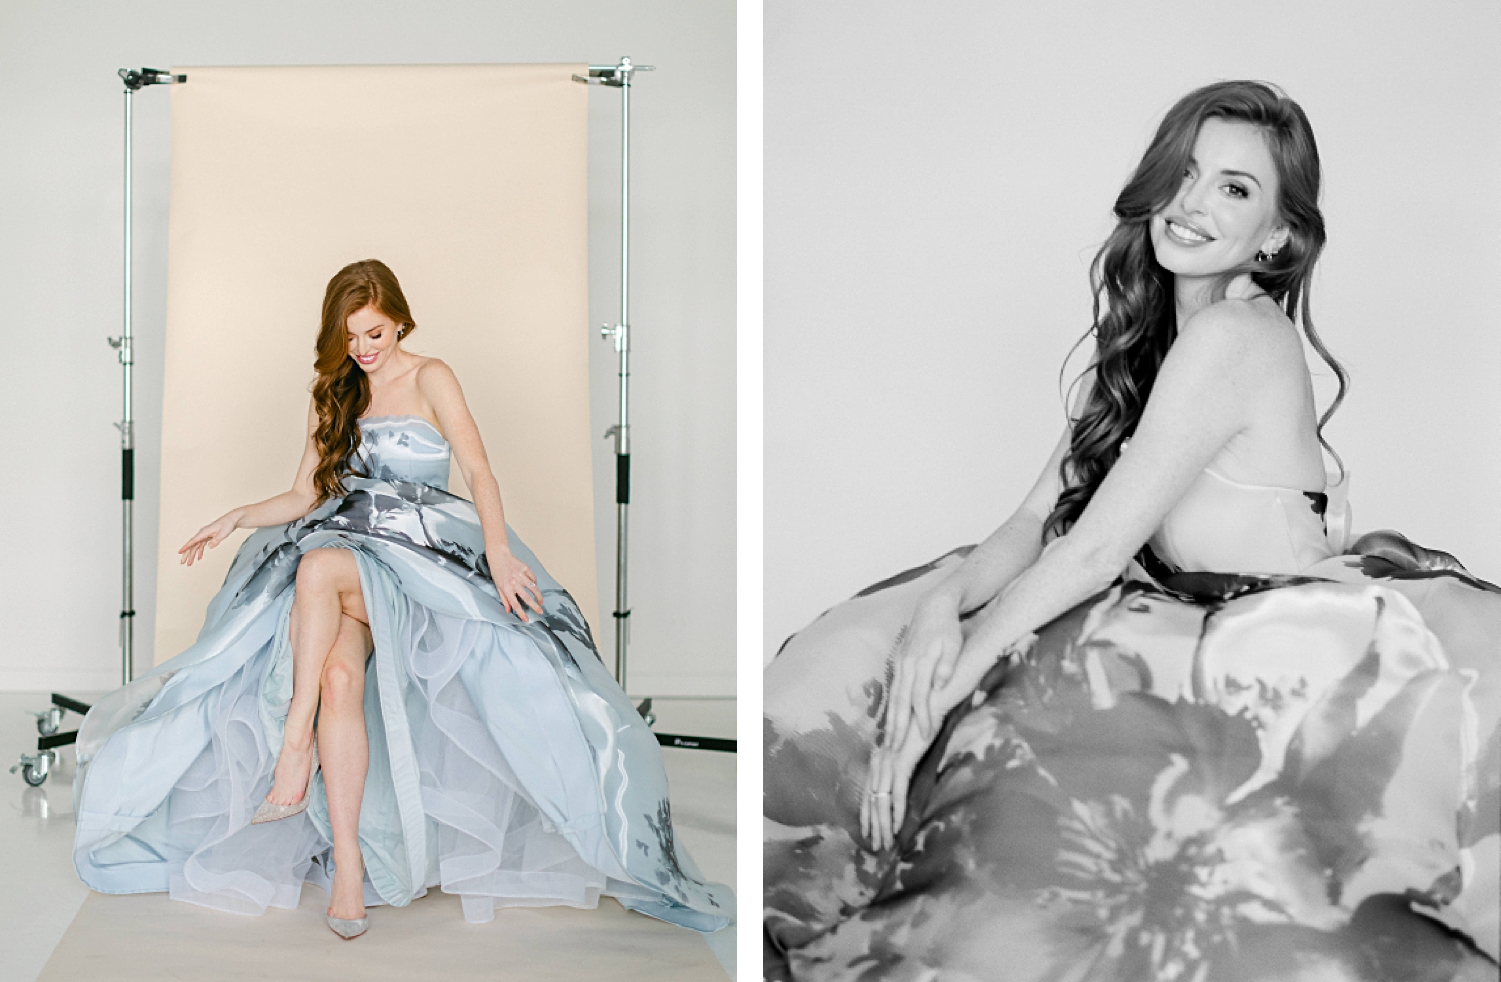 Blue floral ball gown worn by redhead woman laughing